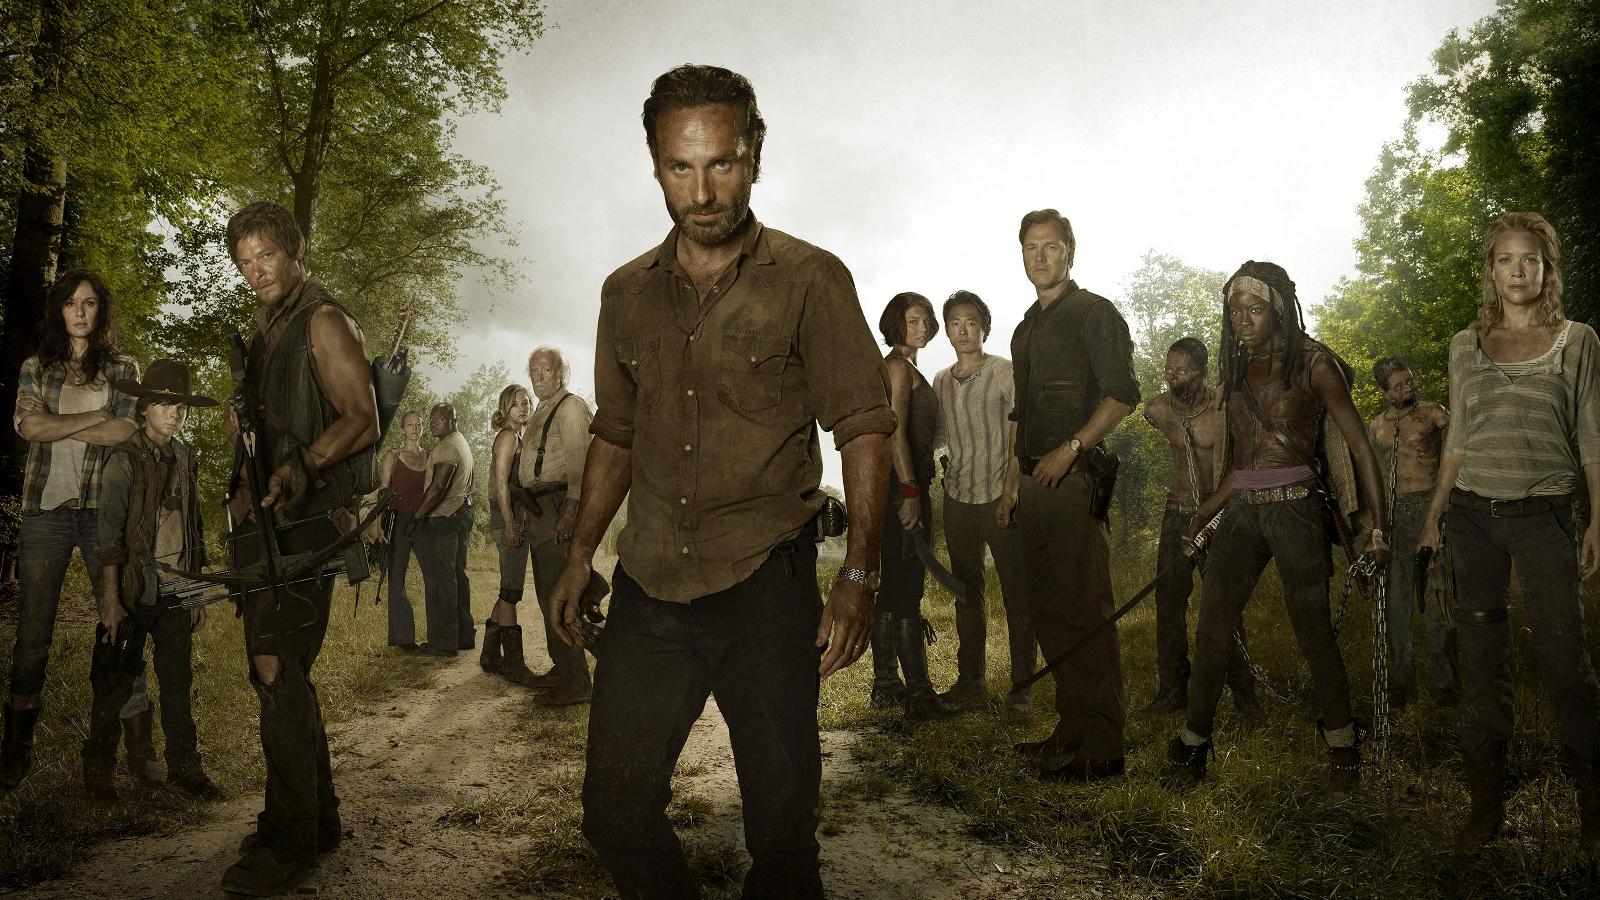 A Walking Dead promotional still featuring the full cast.